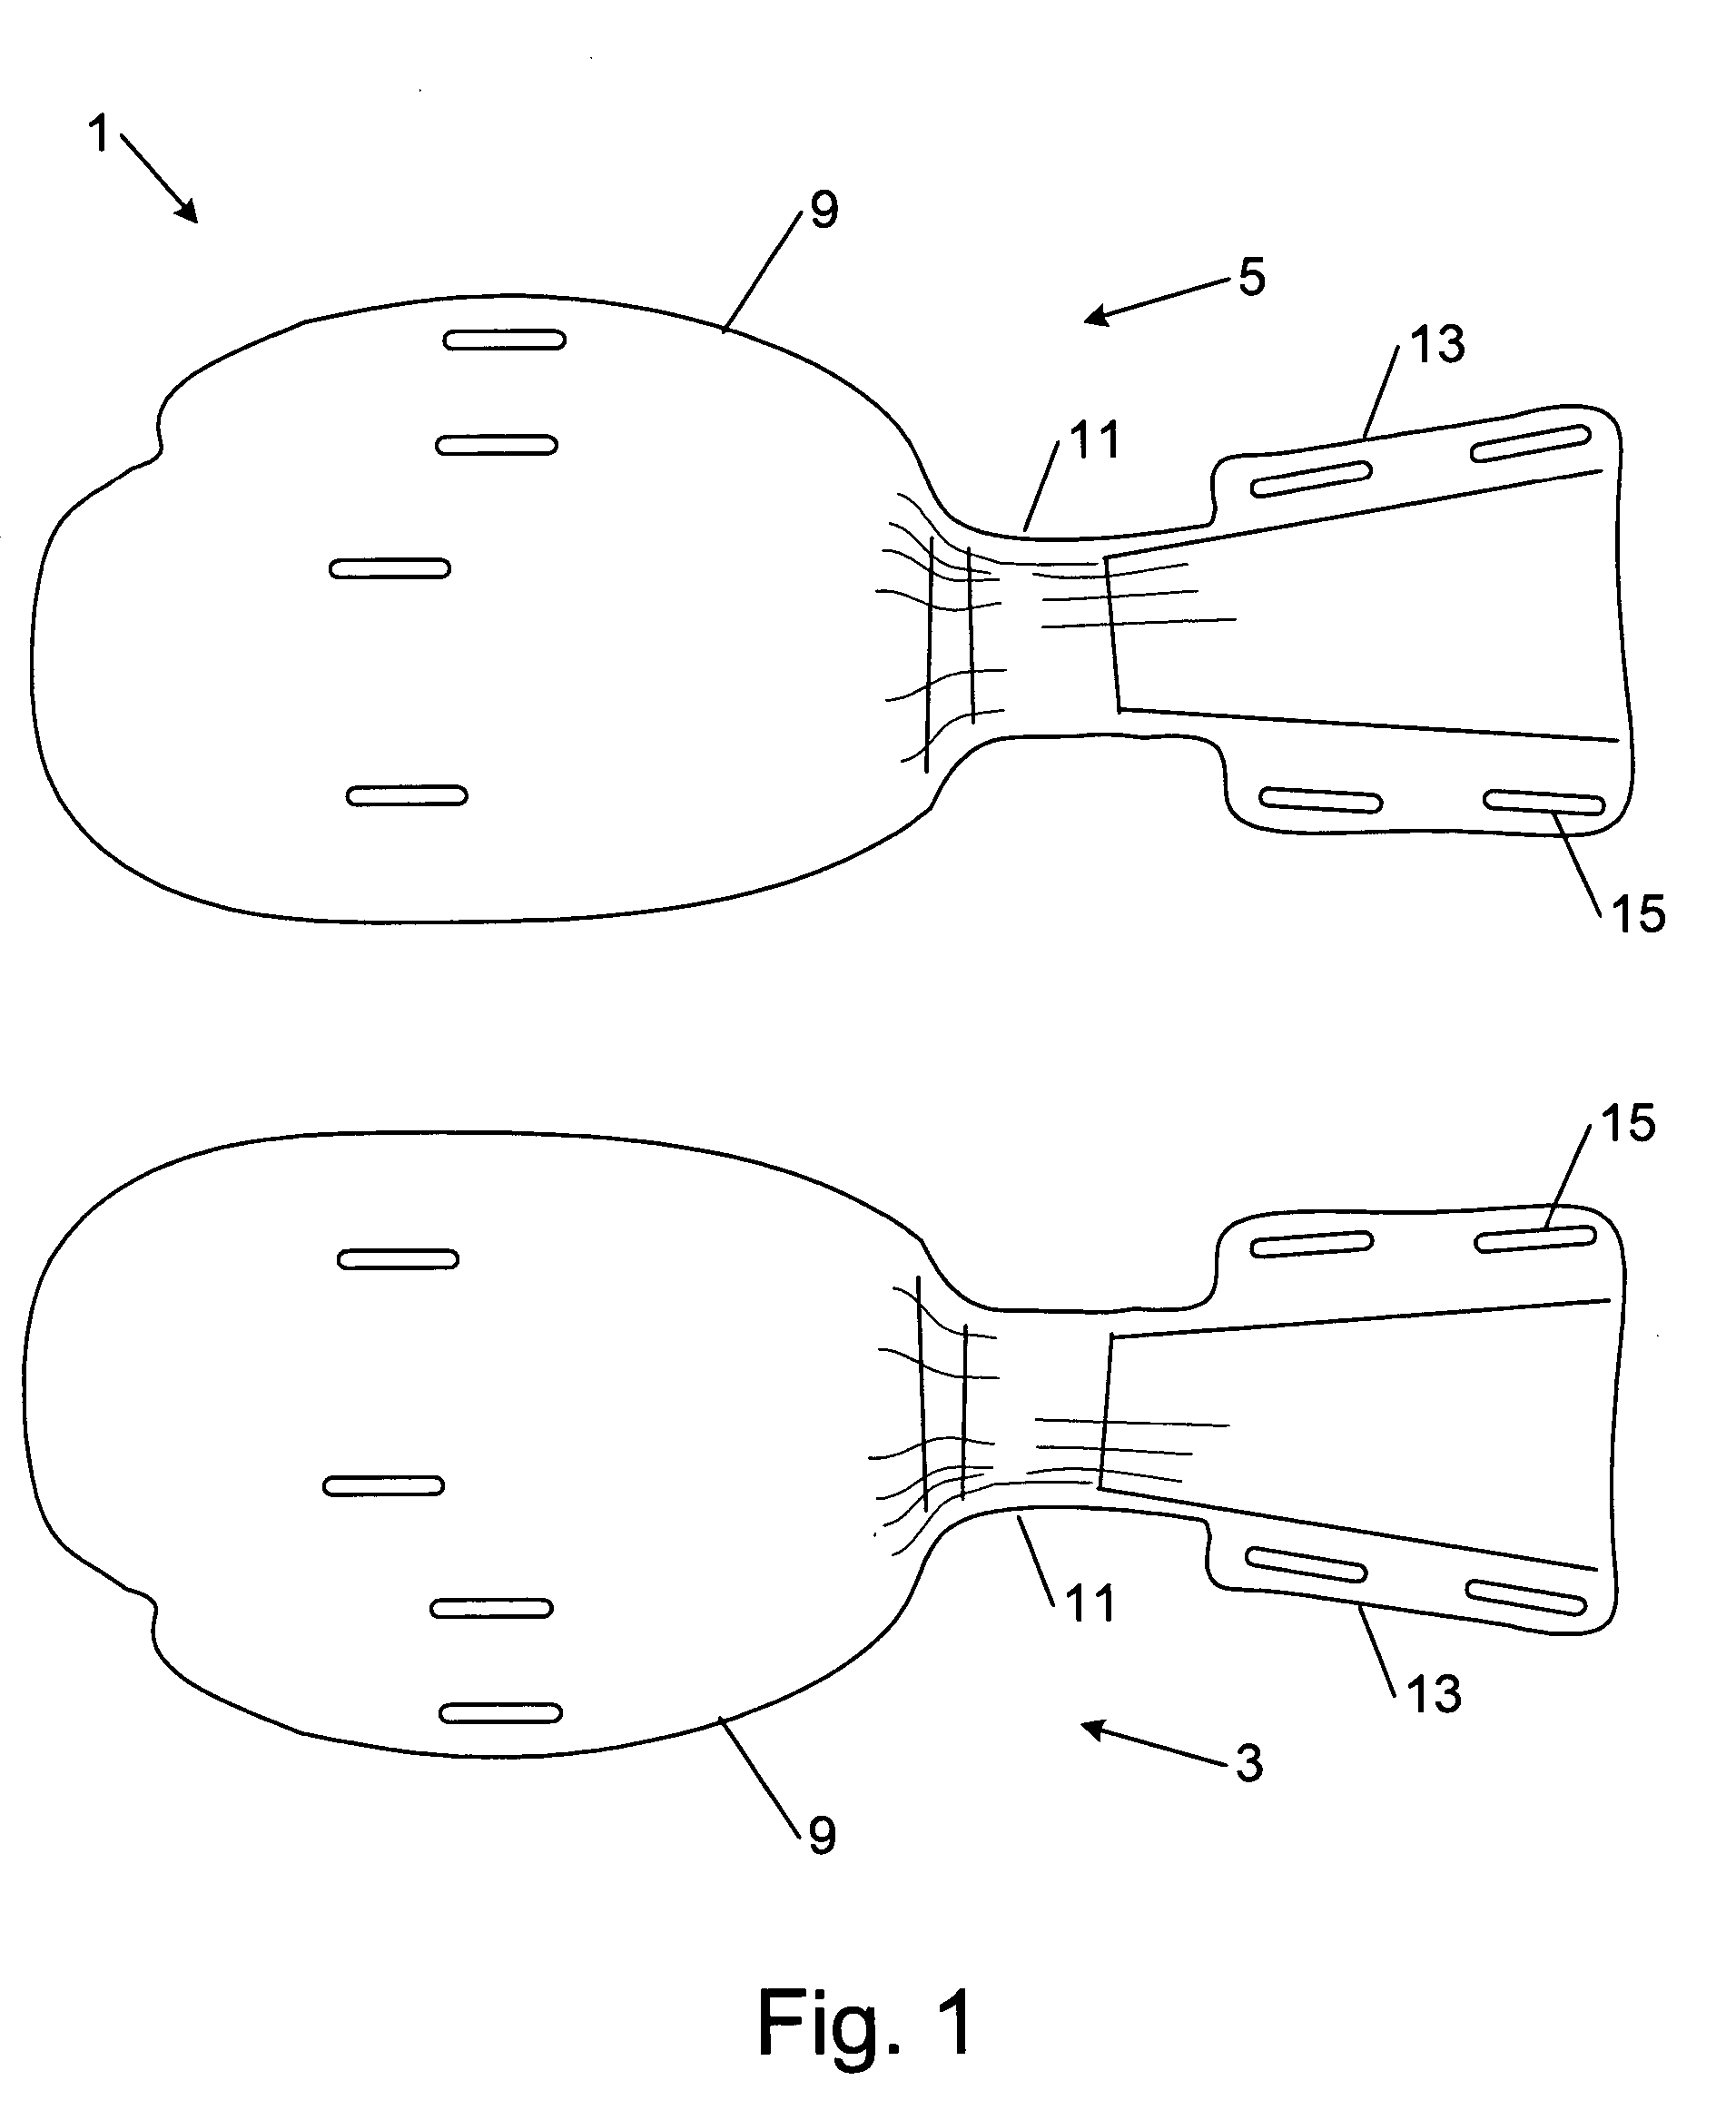 Aquatic propulsion device for swimmers